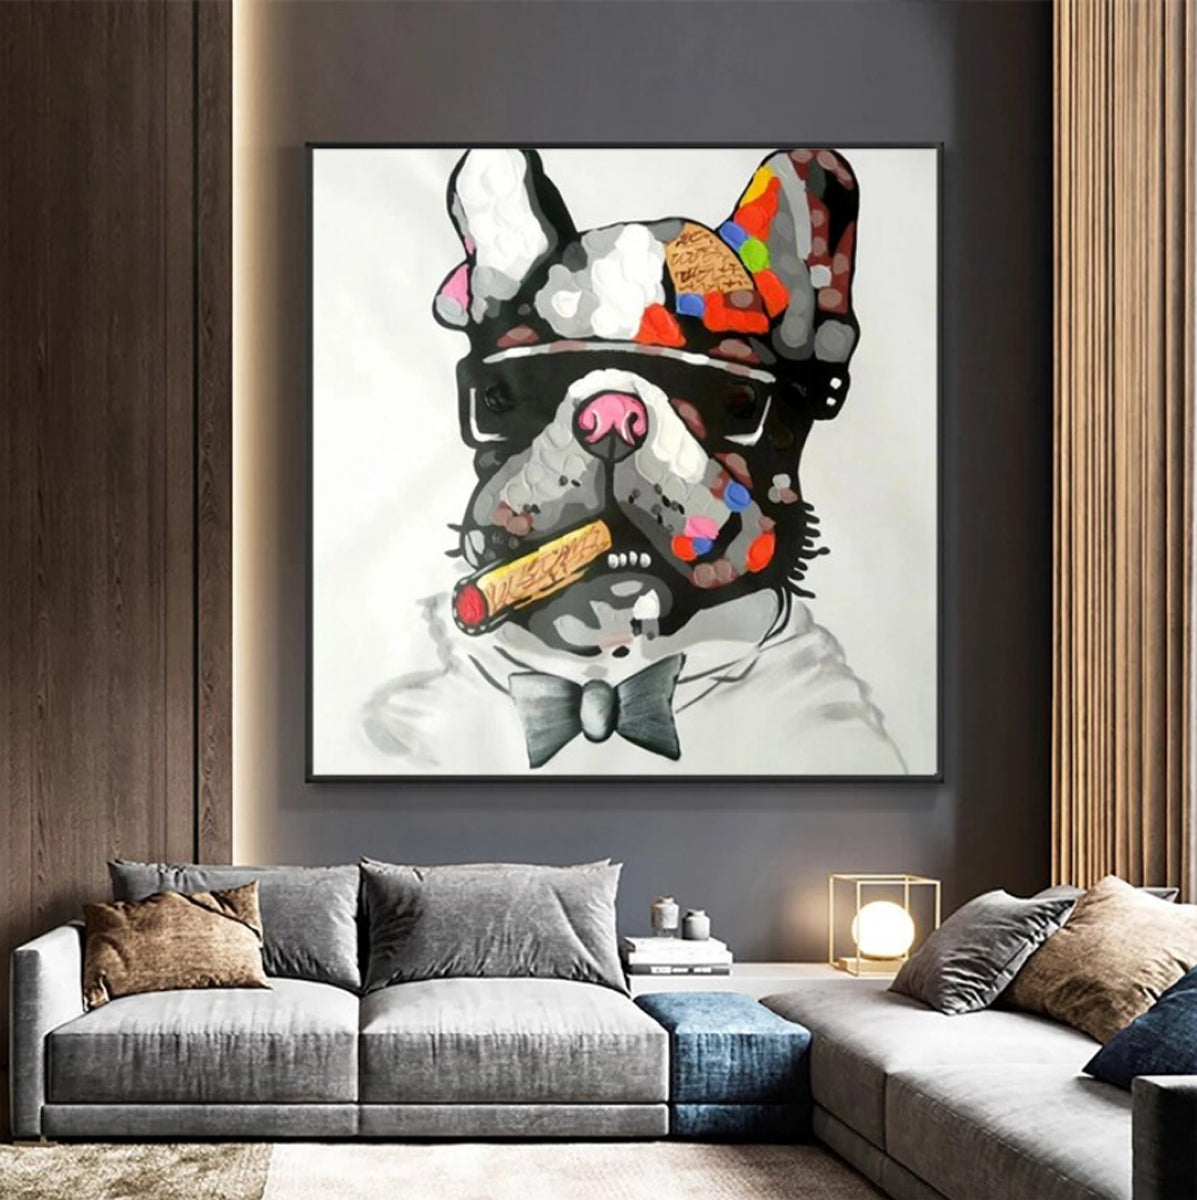 TPFLiving Poster Canvas / Abstract, Funny and Colorful Animal Motifs / –  Traumpreisfabrik